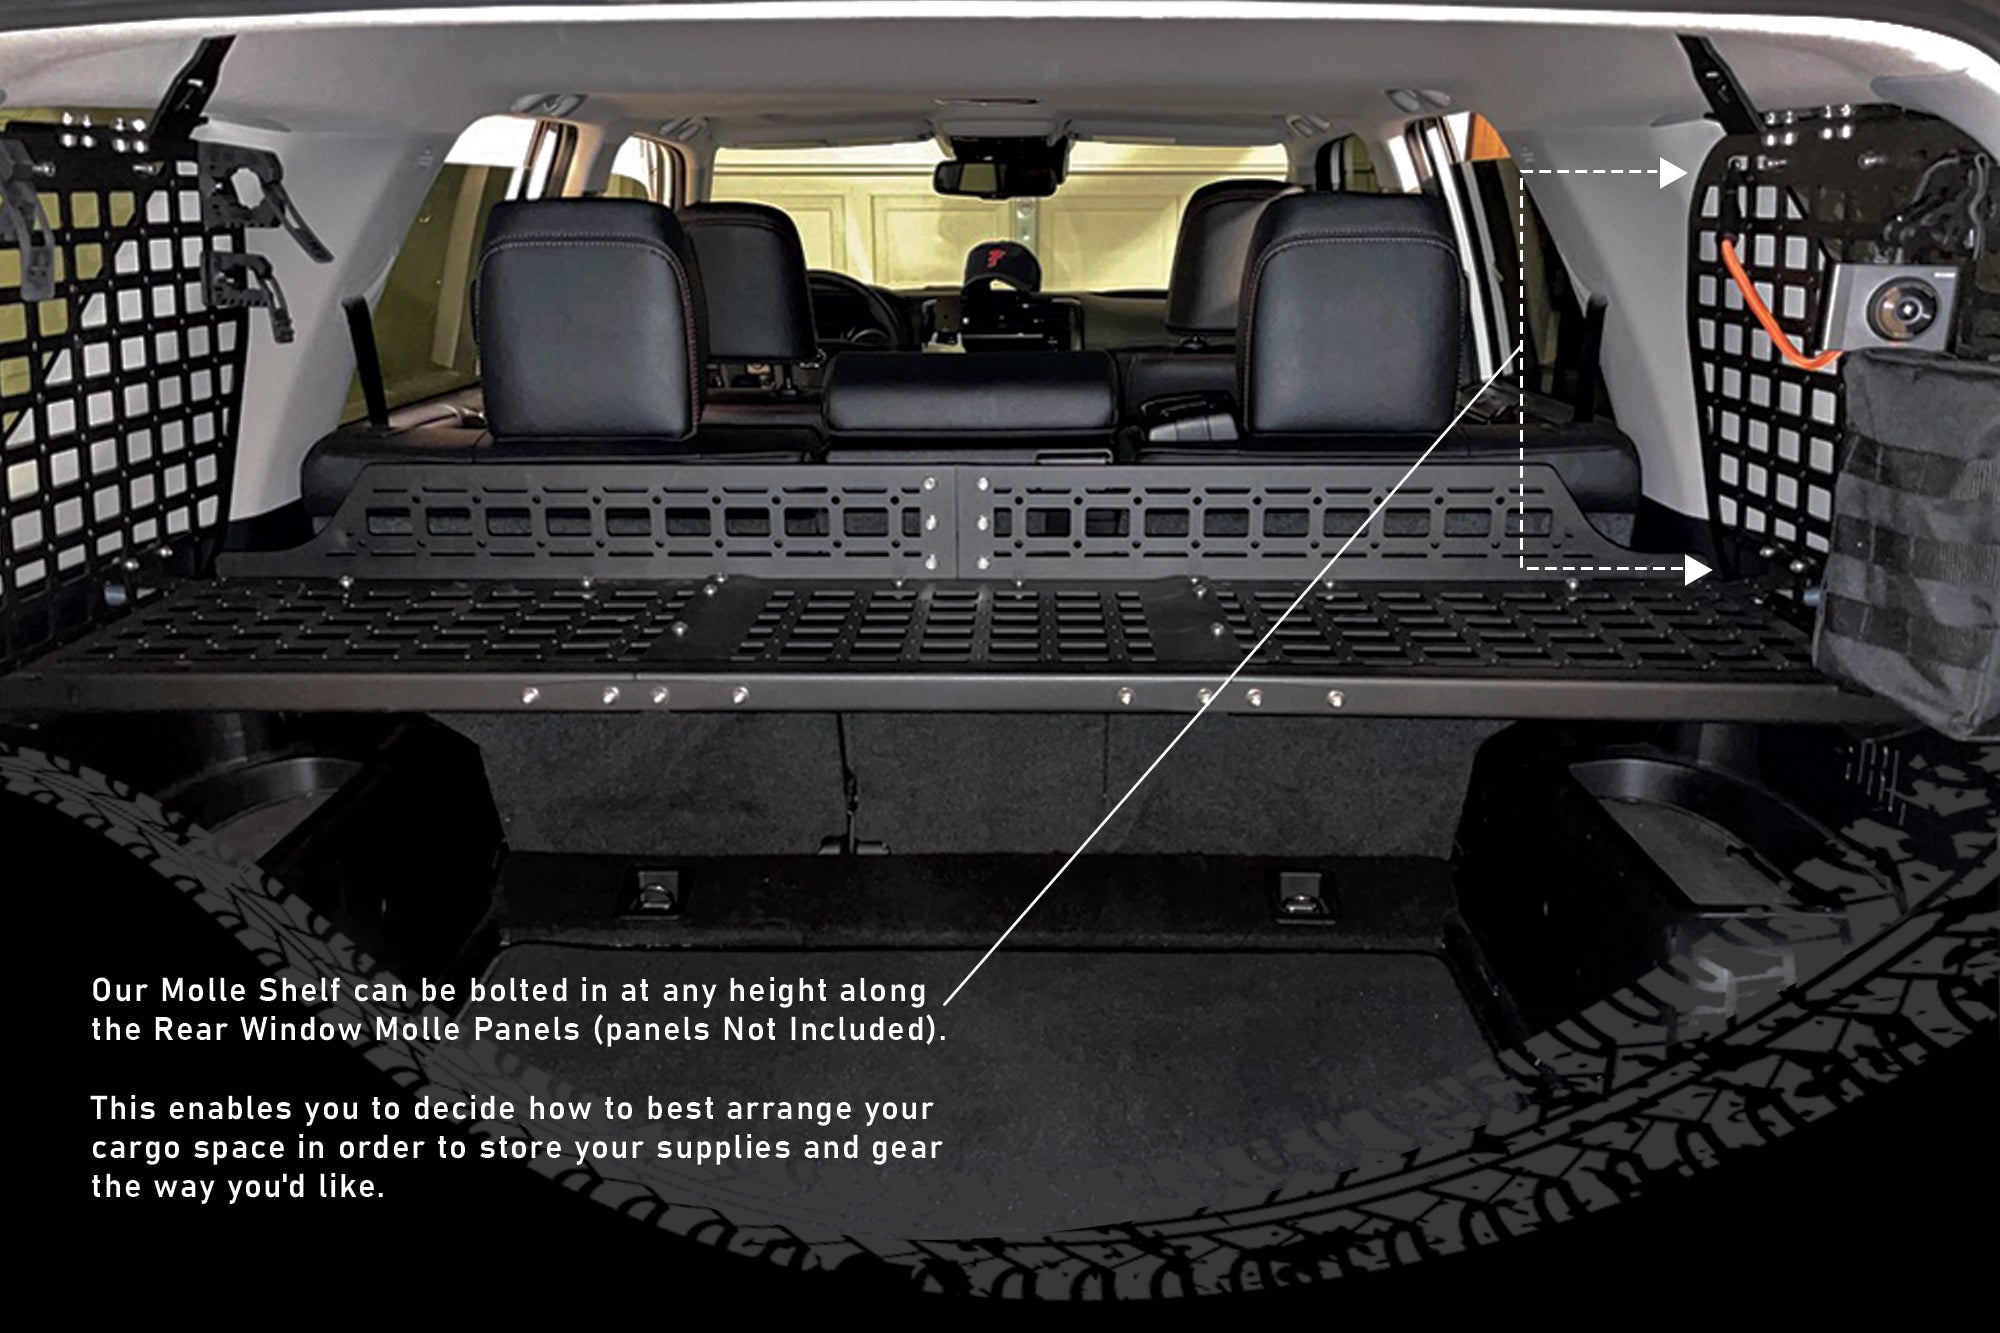 Image Text reads: Our molle Shelf can be bolted in at any height along the rear window molle panels (not included). This enables you to decide how to best arrange your Cargo Space in order to store your supplies and gear the way you'd like